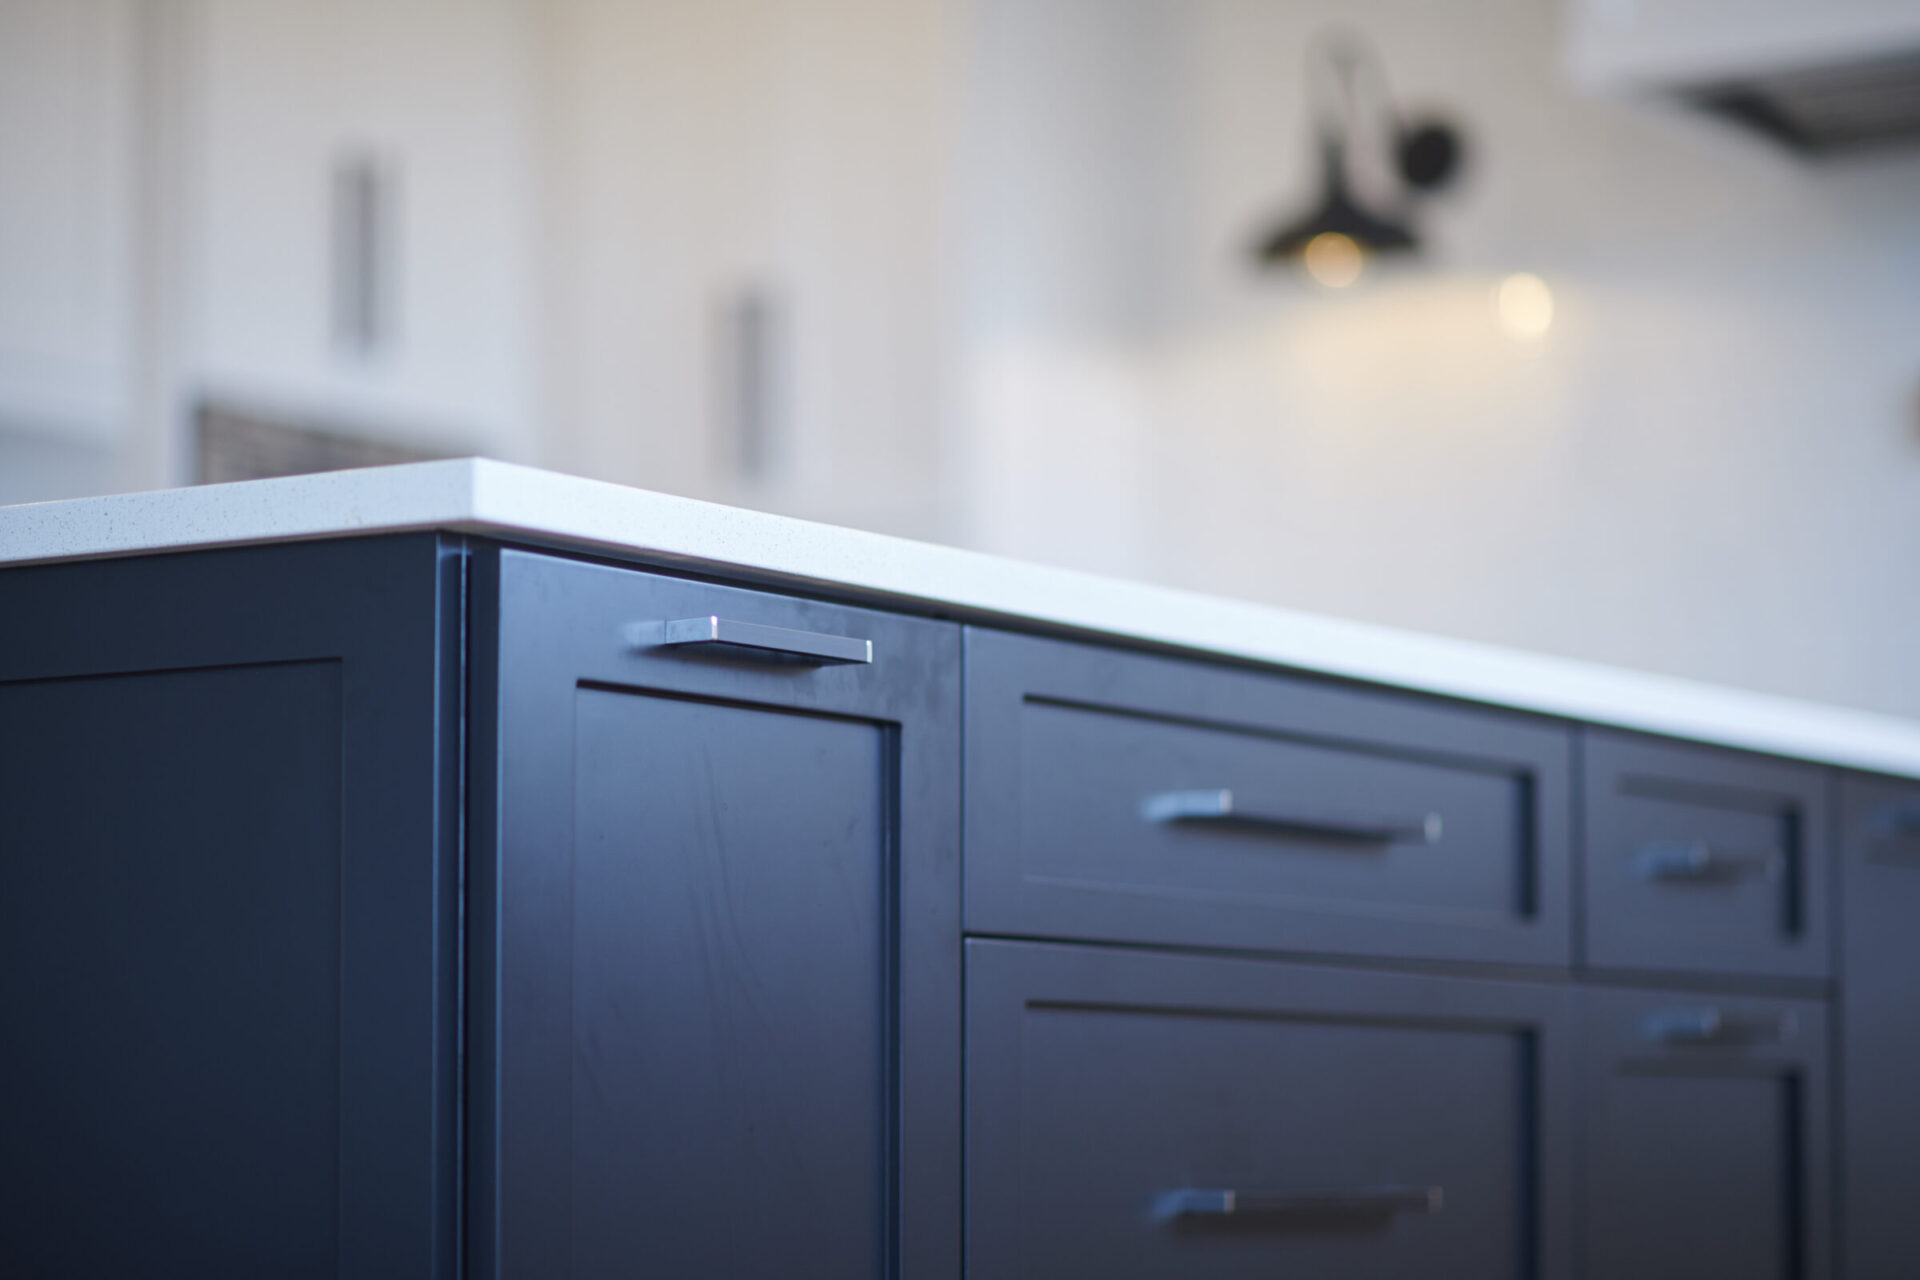 Modern kitchen with dark cabinetry and metallic handles. Out-of-focus background shows a bright wall and part of a wall-mounted light fixture.